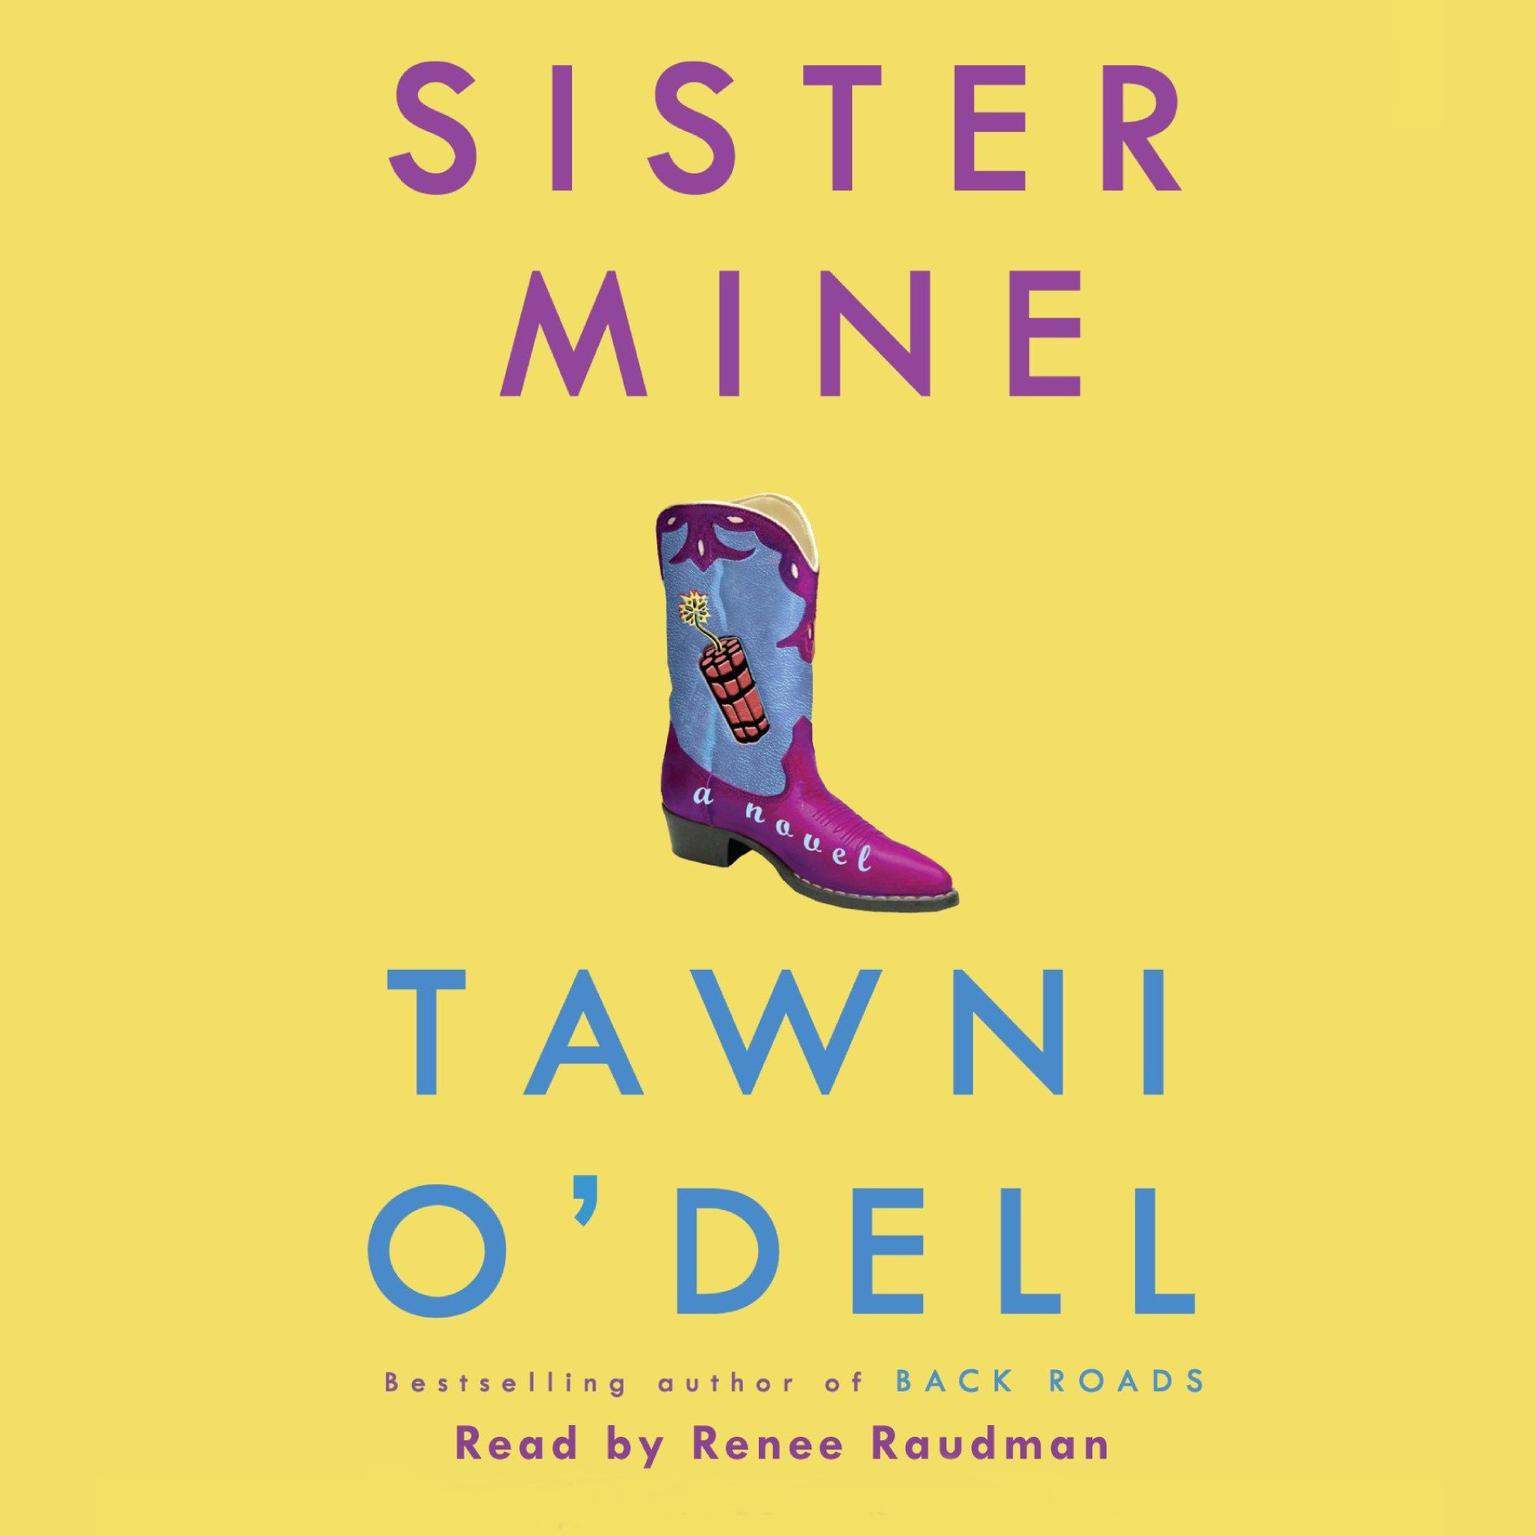 Sister Mine (Abridged): A Novel Audiobook, by Tawni O’Dell